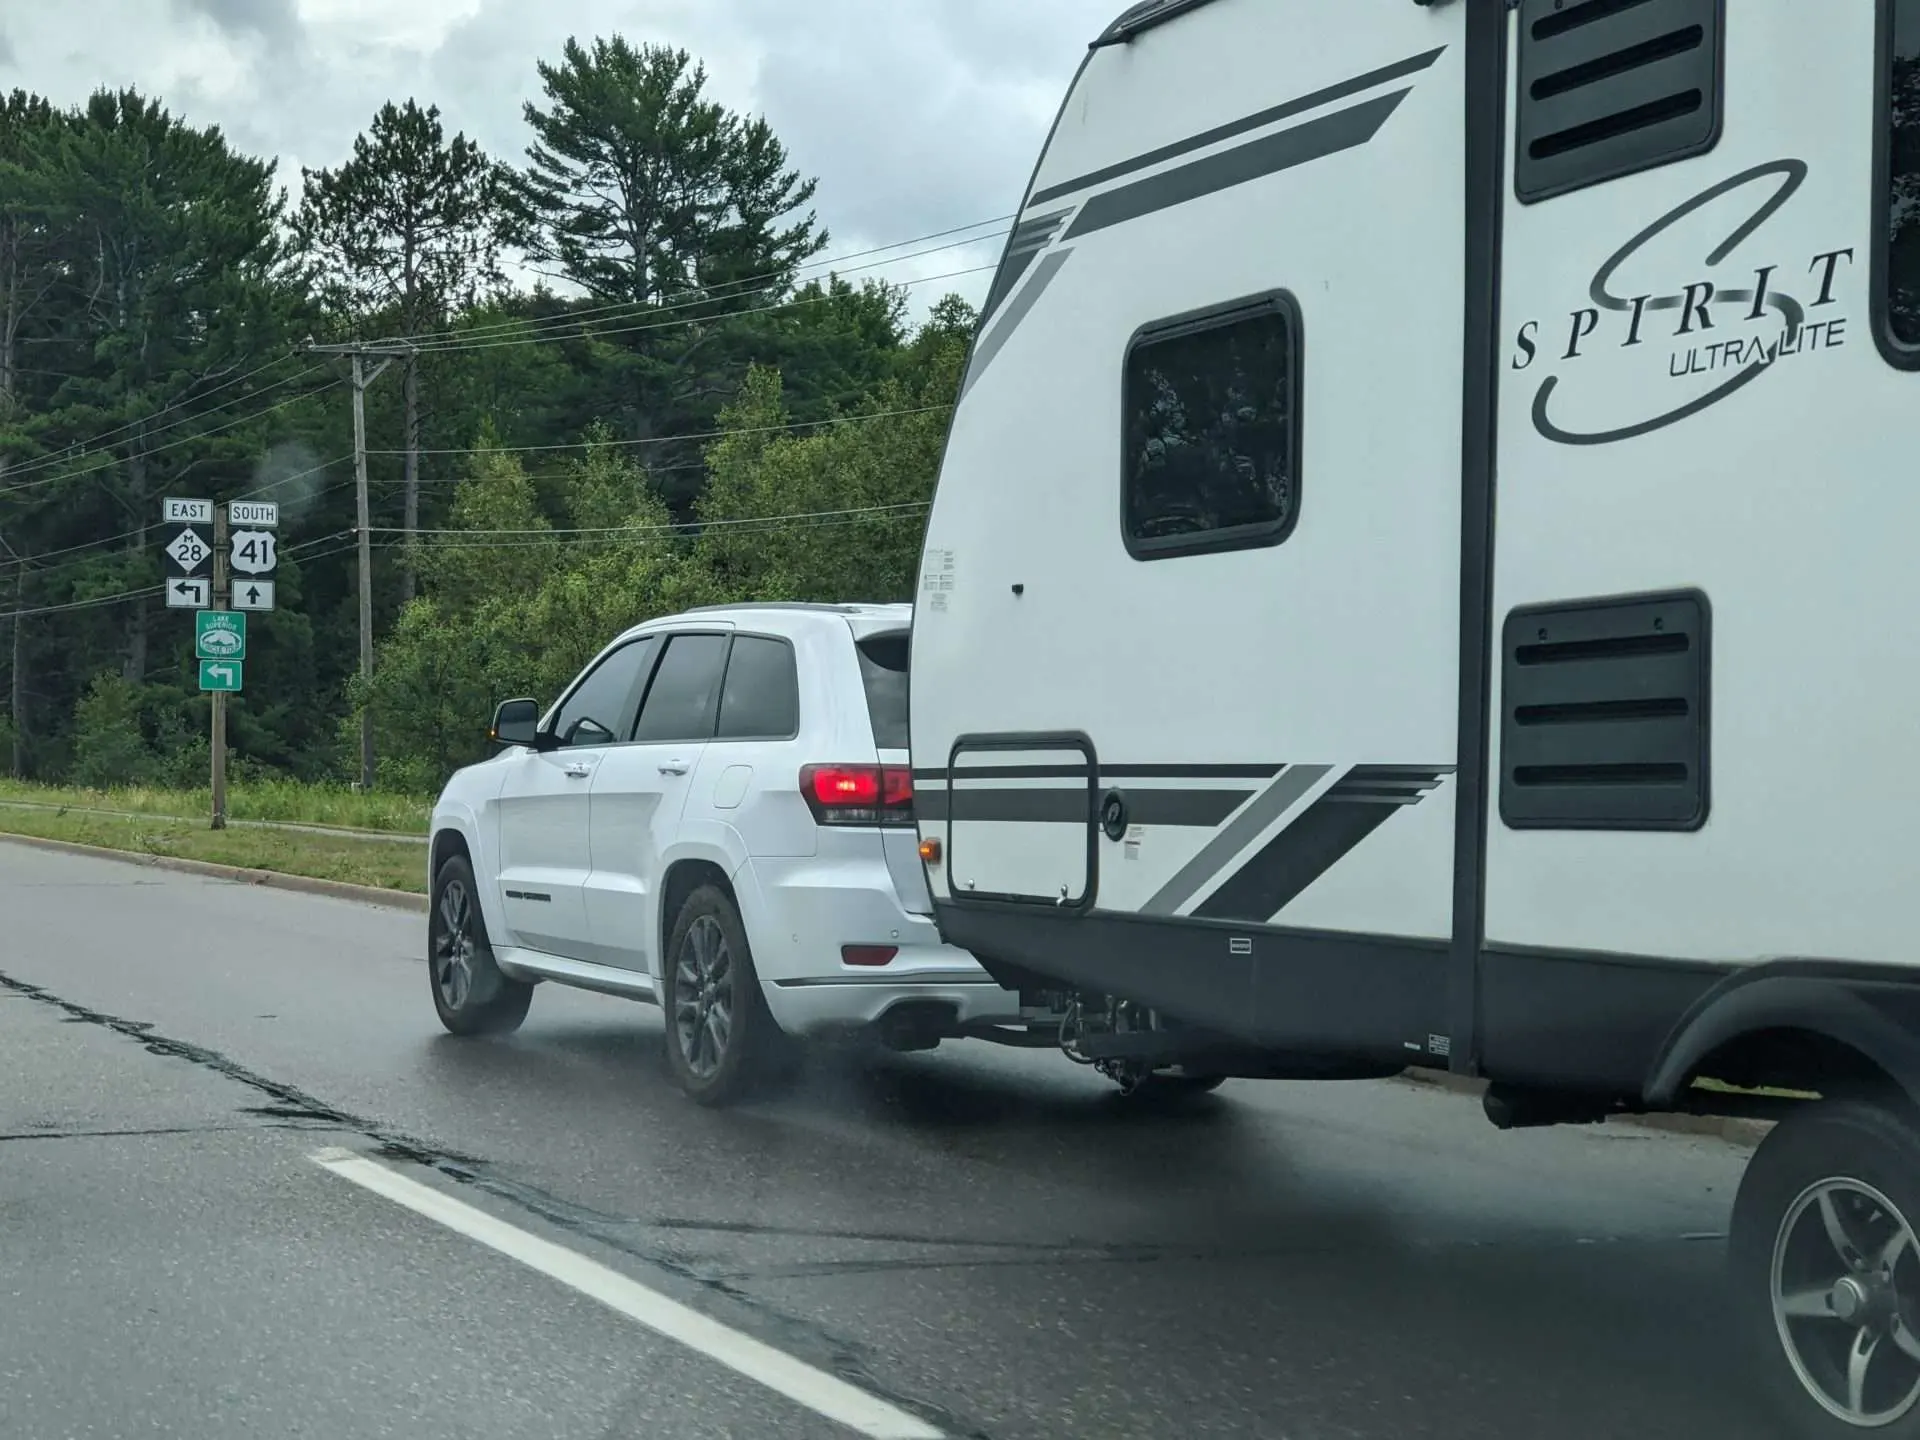 SUV towing travel trailer